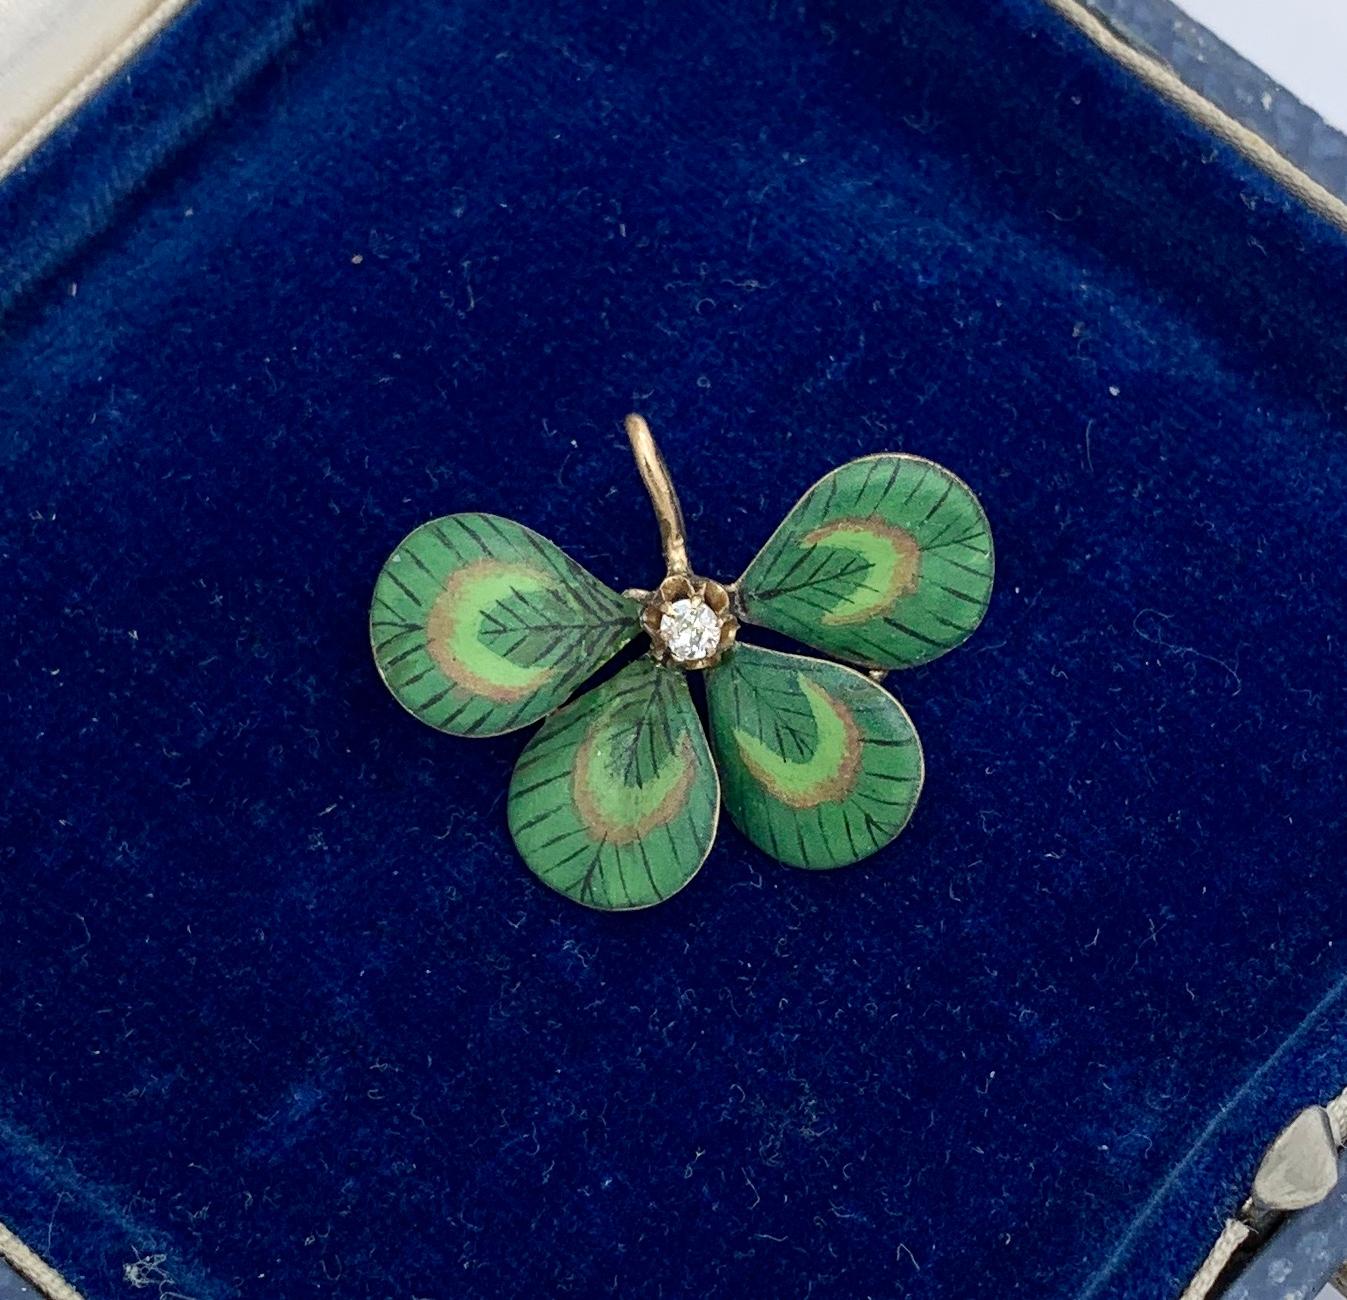 A very special Victorian - Edwardian Pendant in the form of a four leaf clover or shamrock in exquisite Enamel with an Old Mine Cut Diamond in the center.  The beautiful clover shamrock flower is done with exquisite enamel work in various shades of